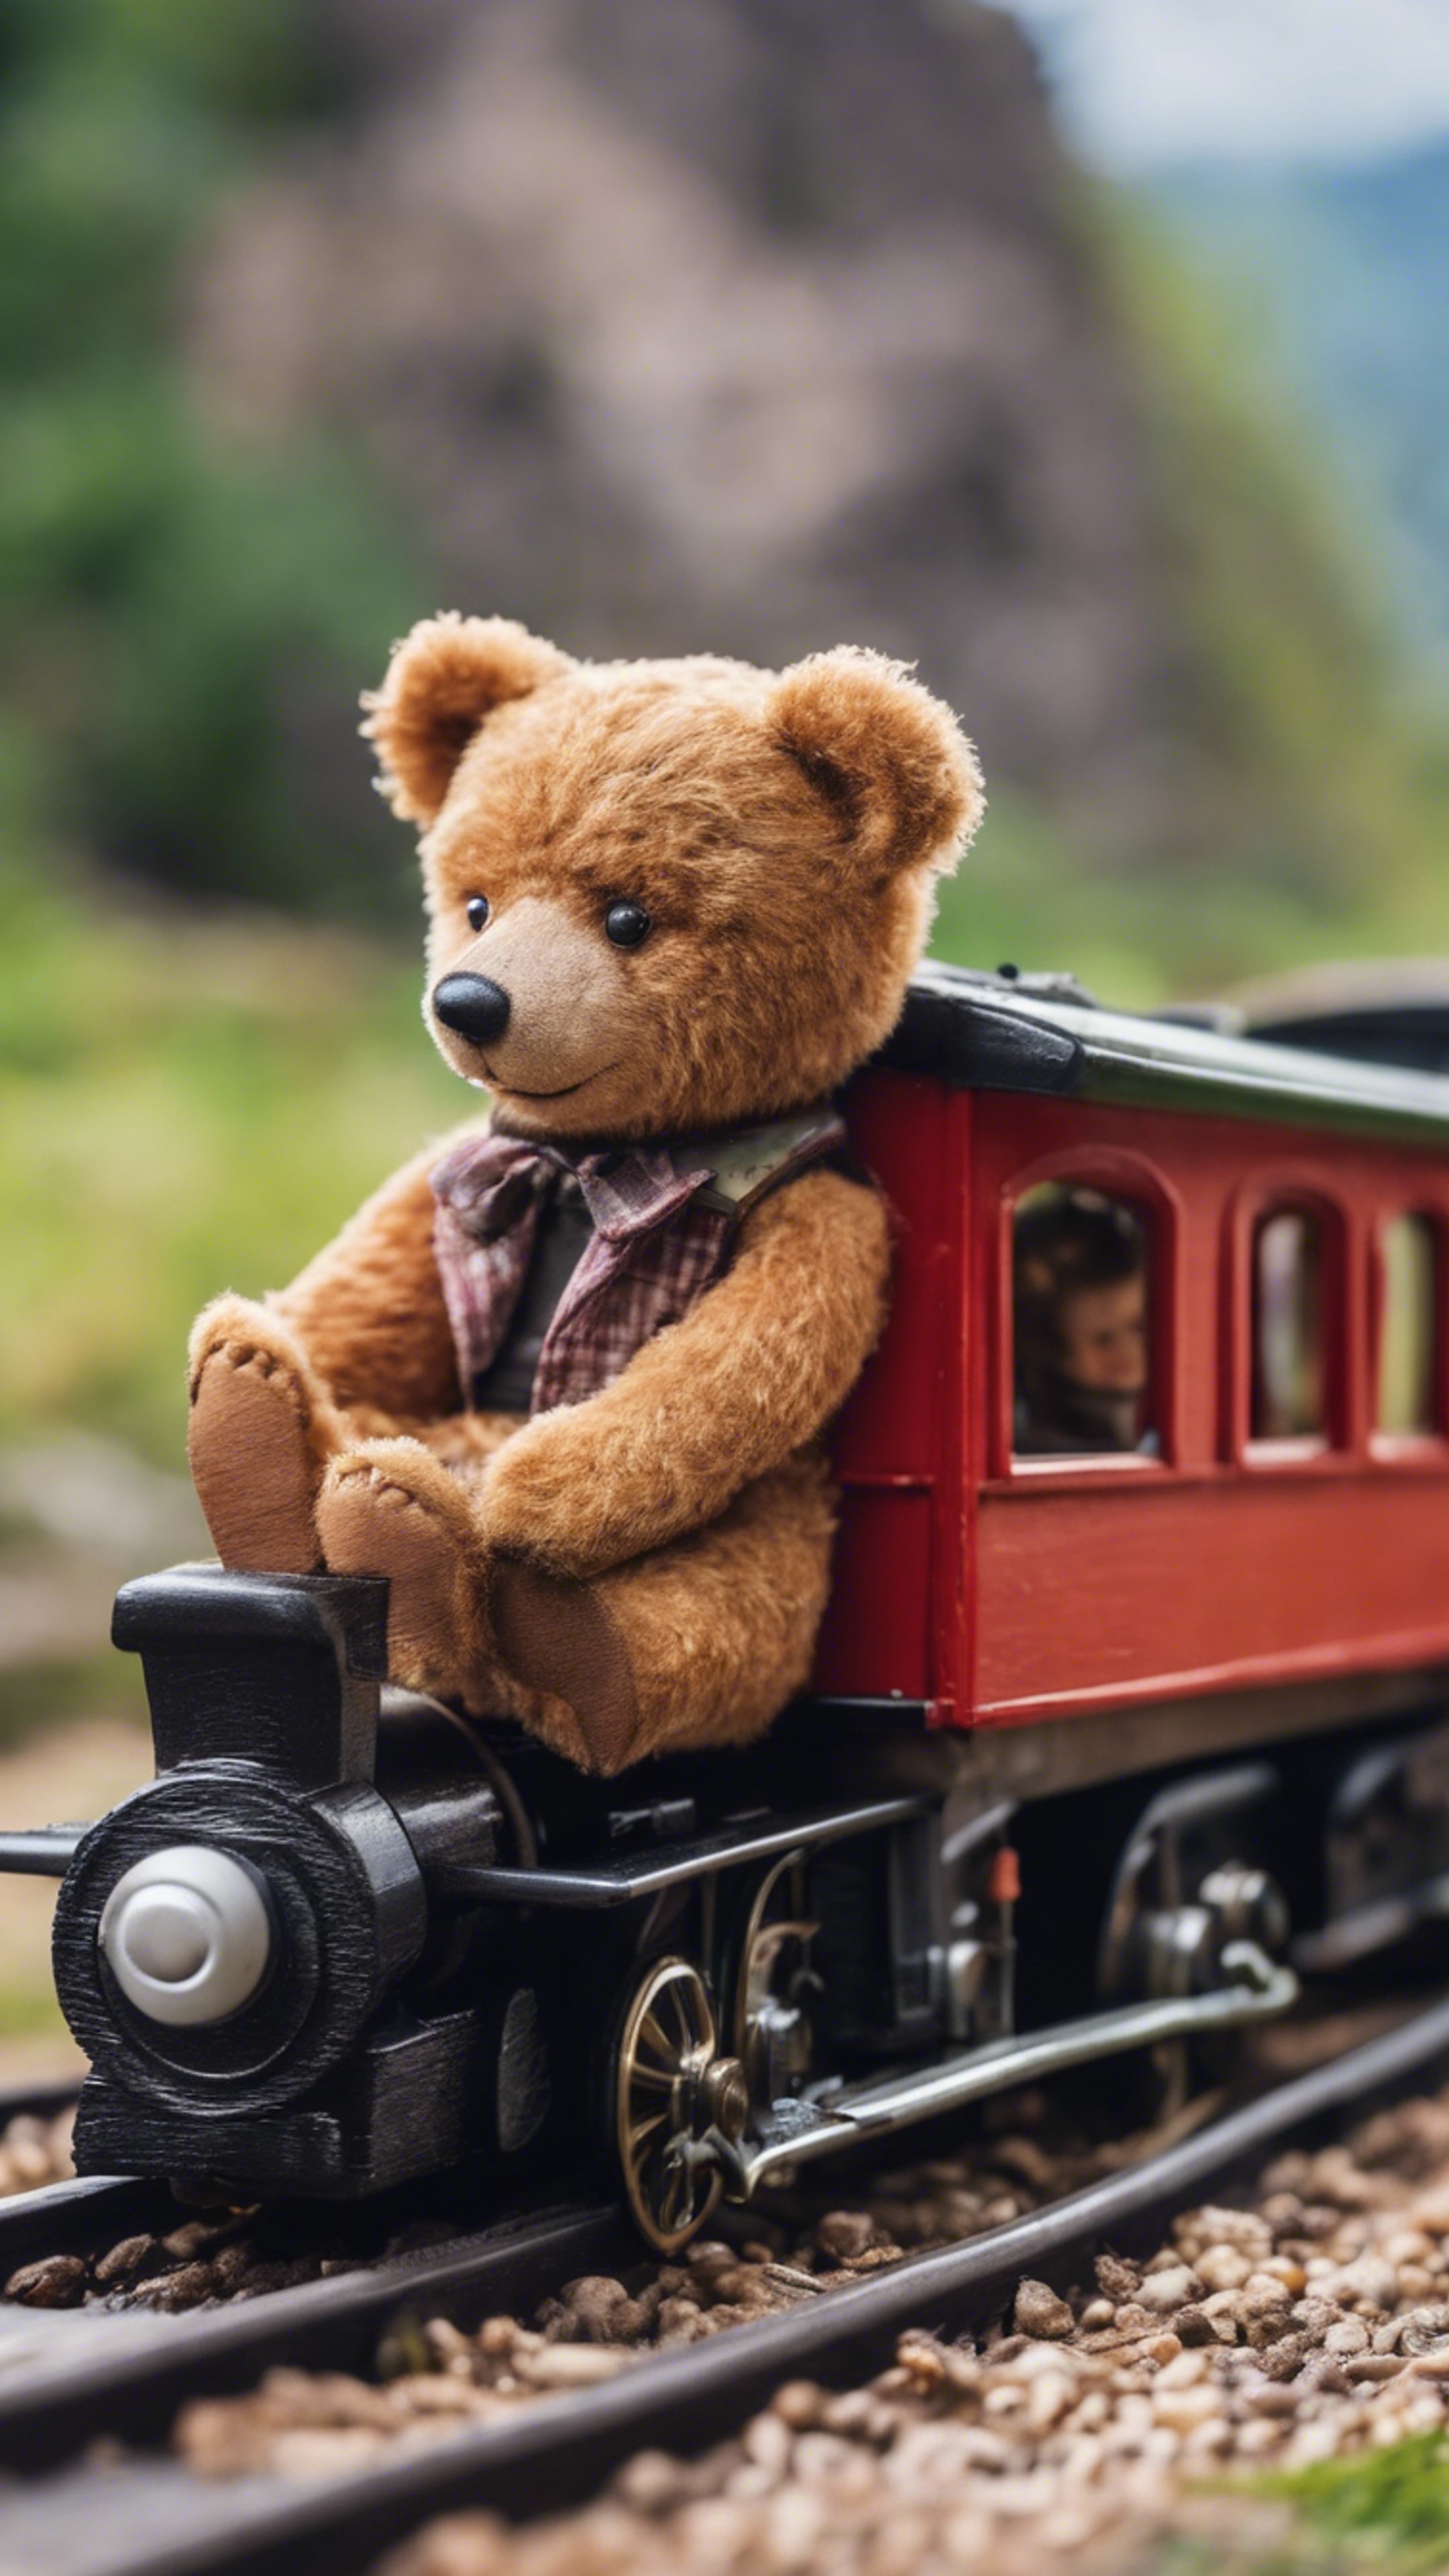 A teddy bear at the helm of a tiny toy train chugging through a scenic model railway.壁紙[ee7fd696a53d42dd9c6f]